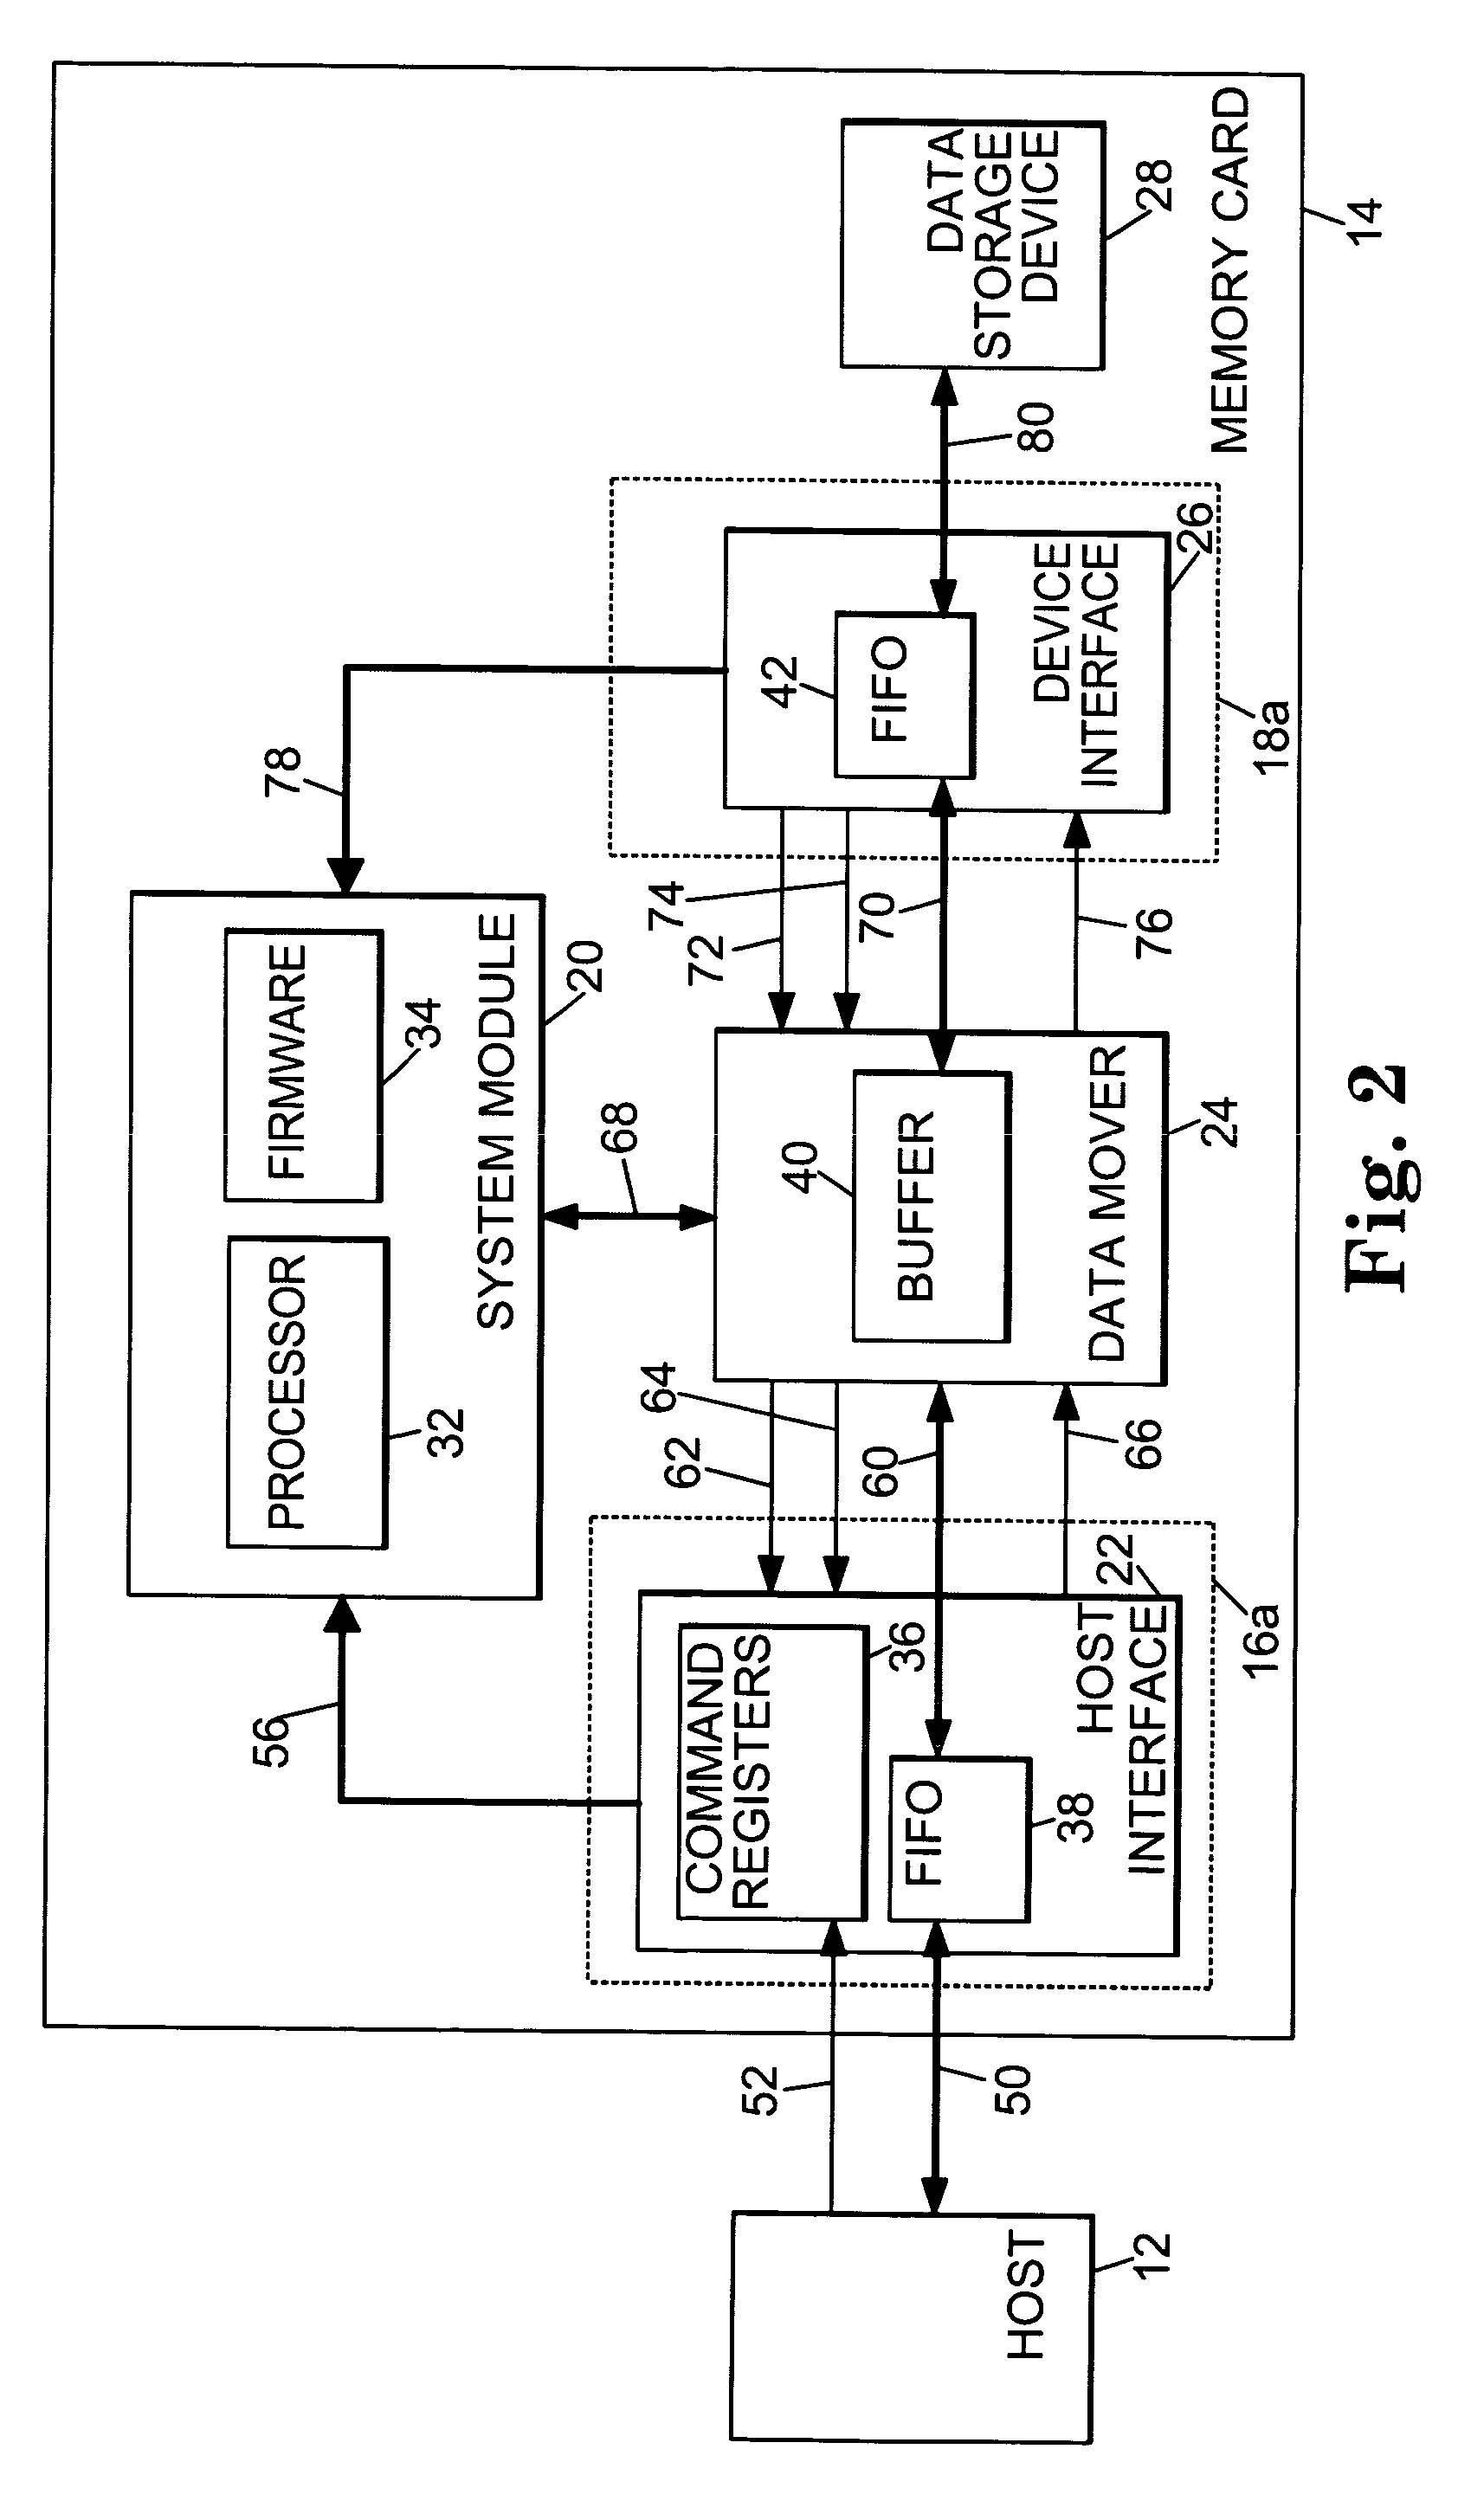 Memory card having a processor coupled between host interface and second interface wherein internal storage code provides a generic interface between host interface and processor